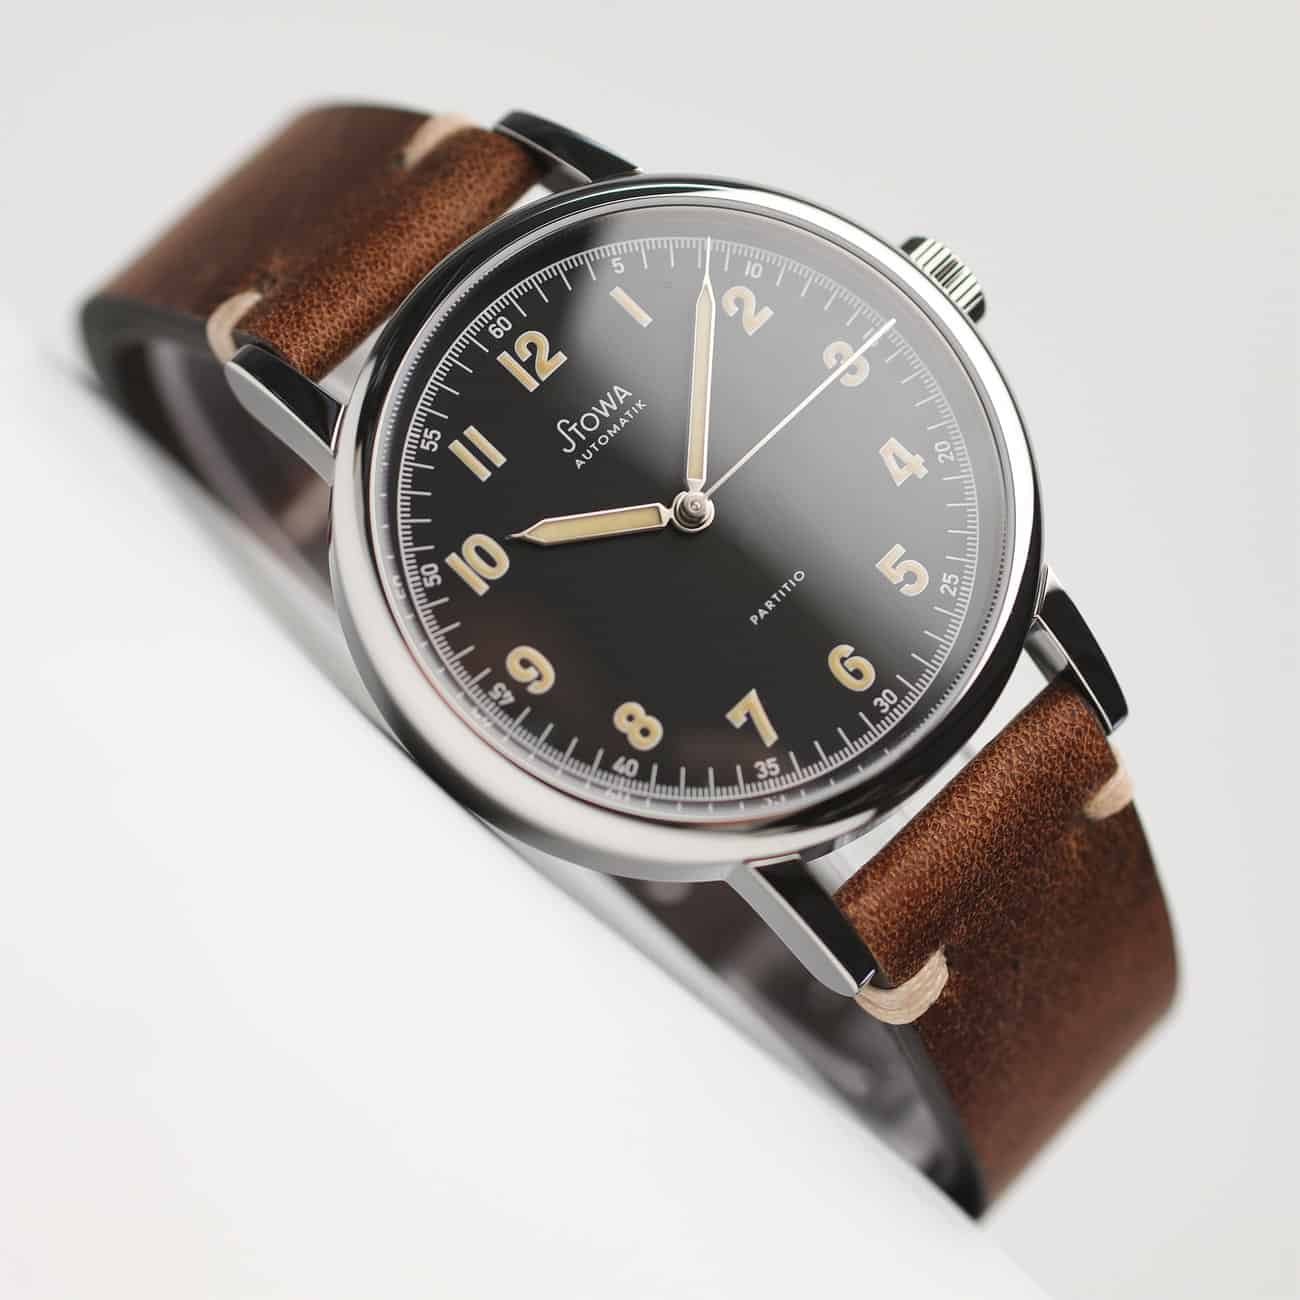 Introducing the Stowa Partitio Vintage Limited Black